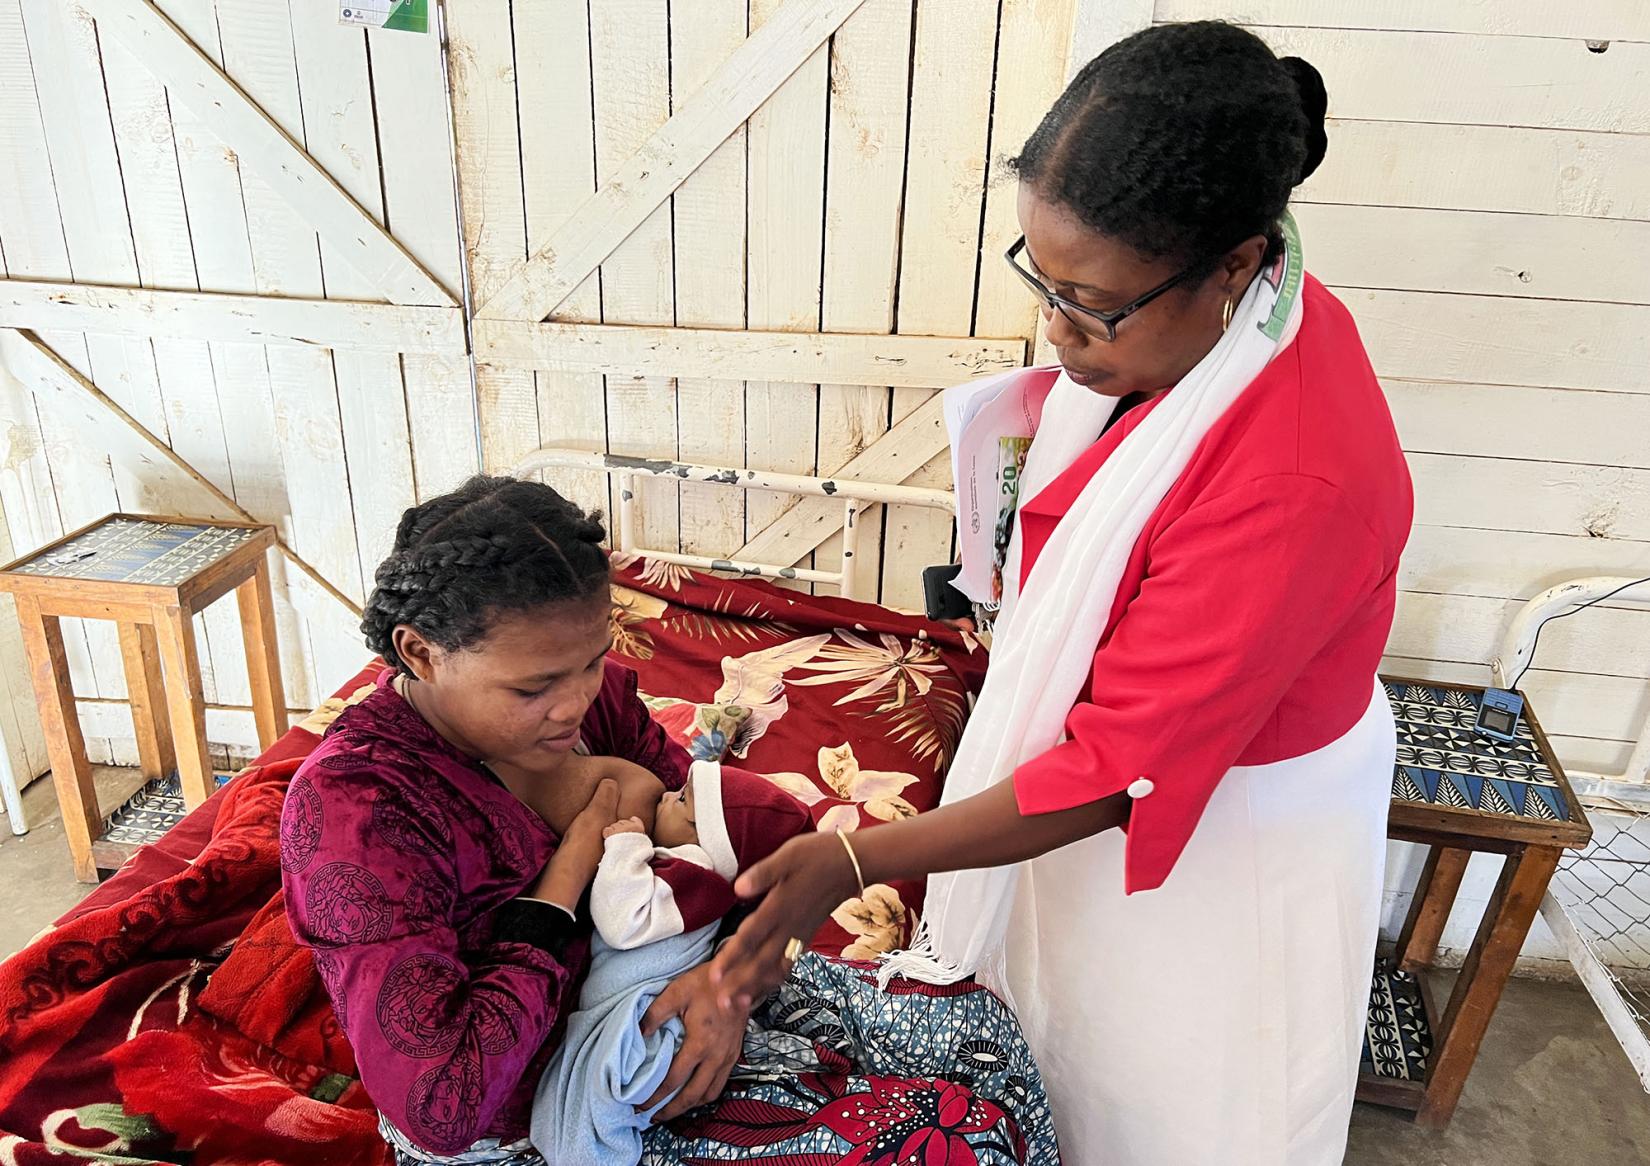 A young mother in Madagascar has been describing how she was forced to make a 200km dash on bumpy, unpaved rural roads to a specialist hospital, after she experienced difficulties giving birth at home.